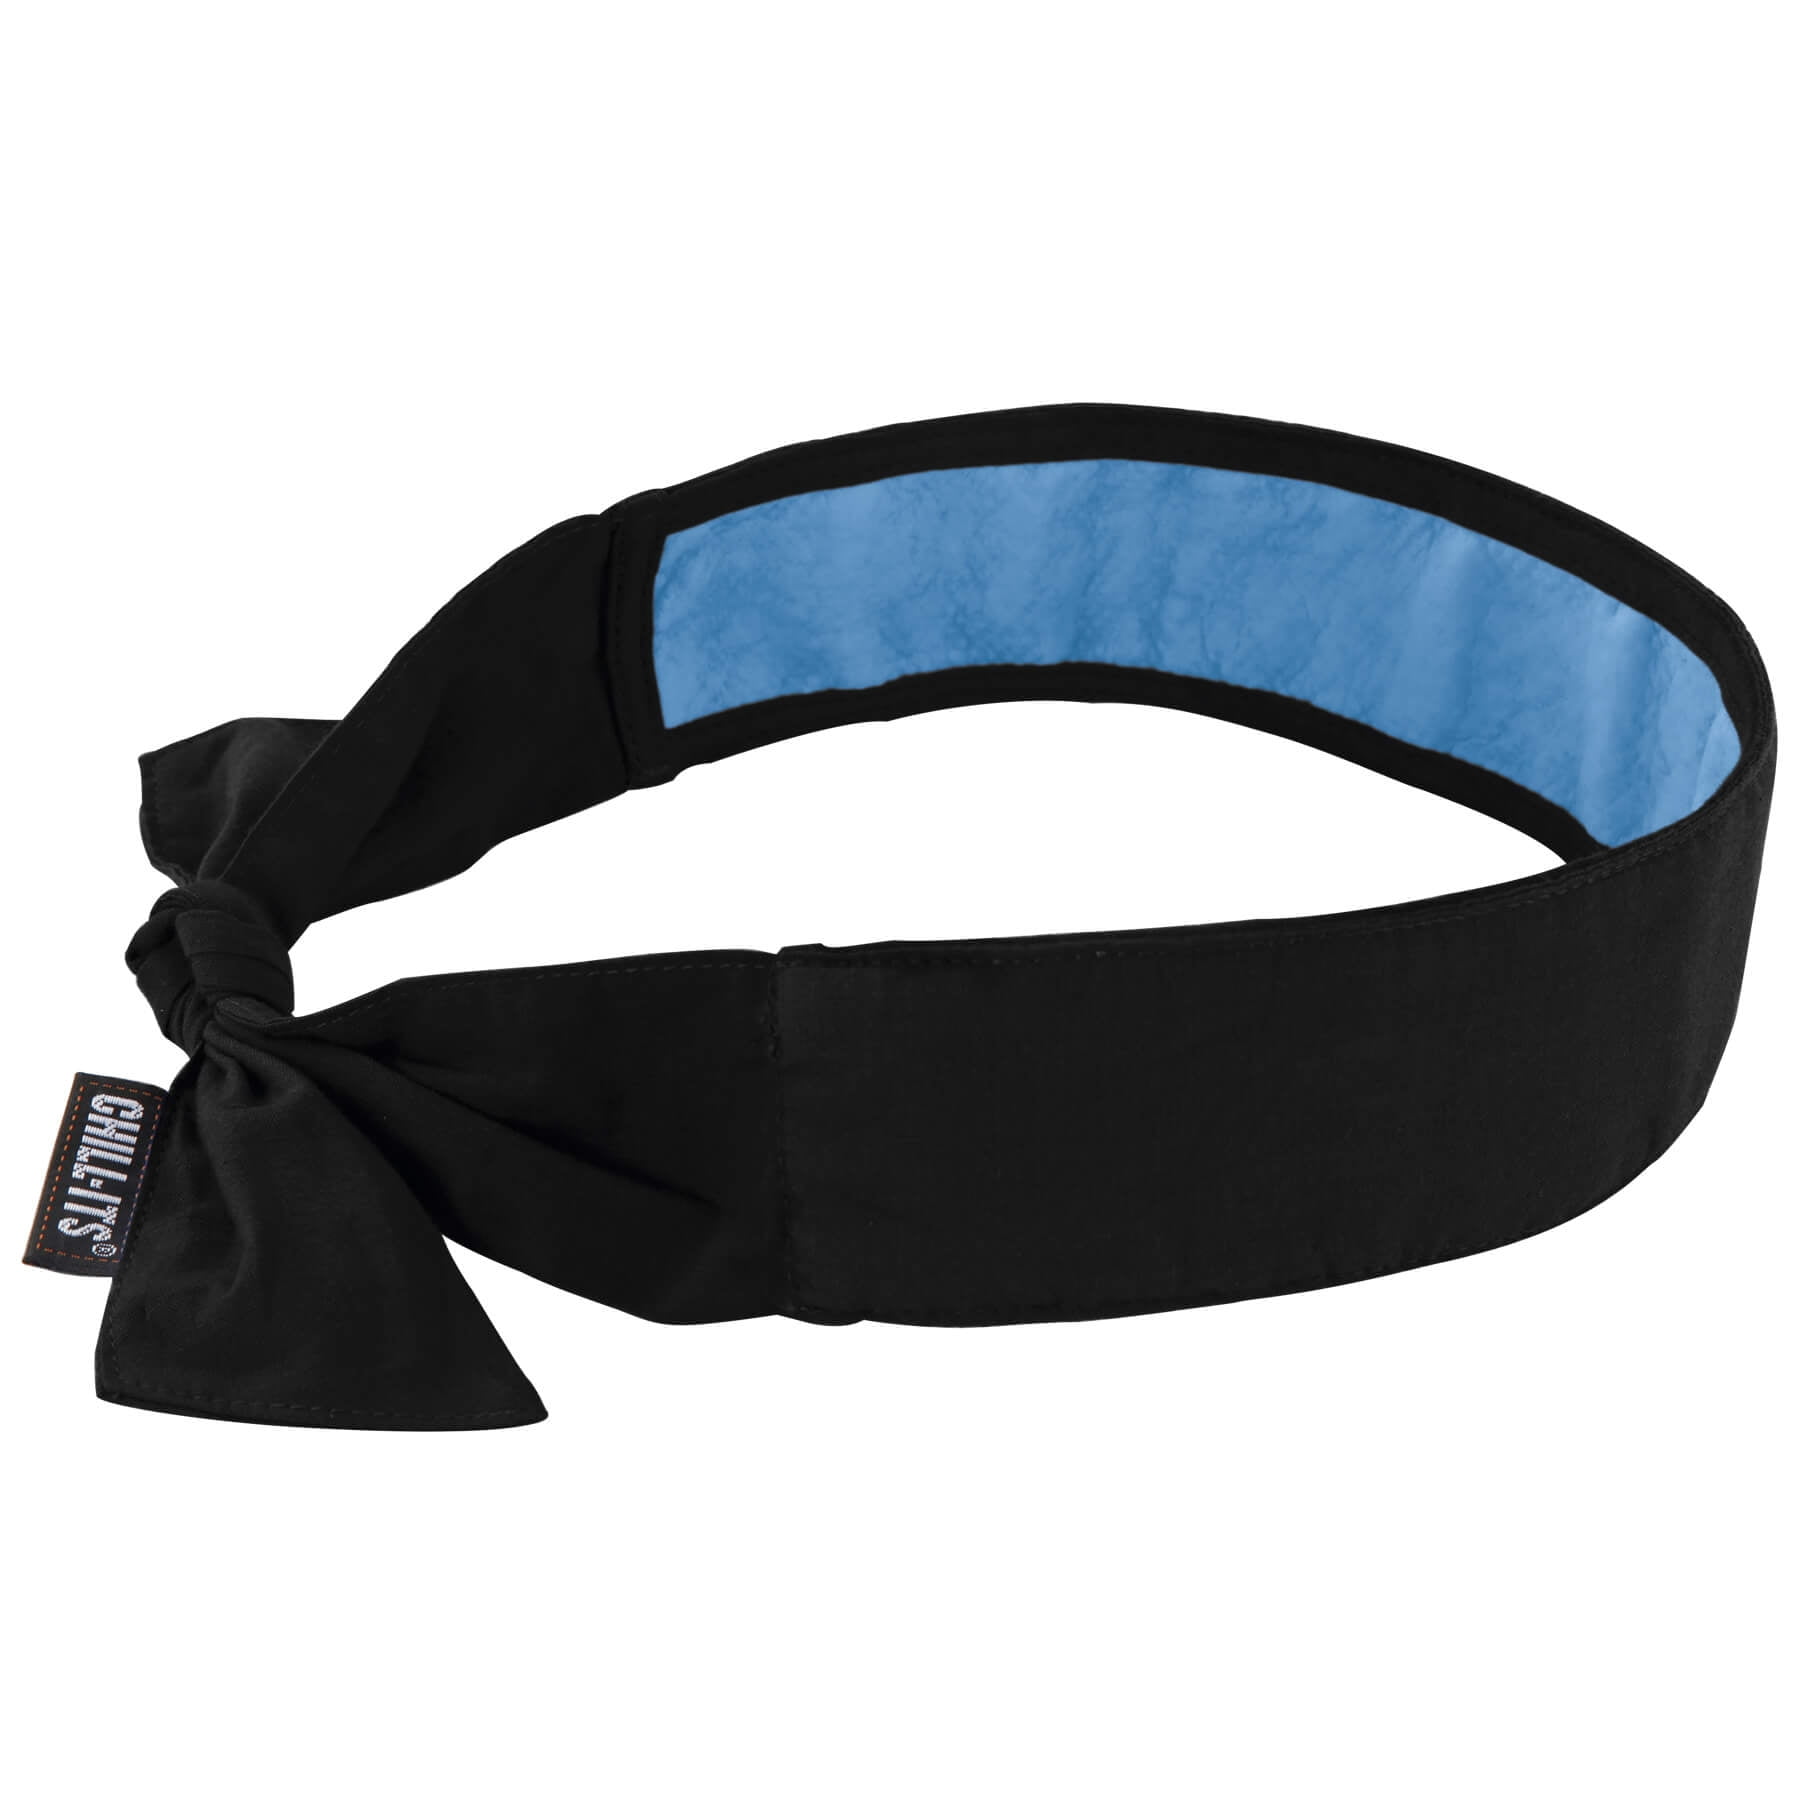 Ergodyne Chill-its 6603 Evaporative Cooling Band Neck Wrap 11 for sale online 